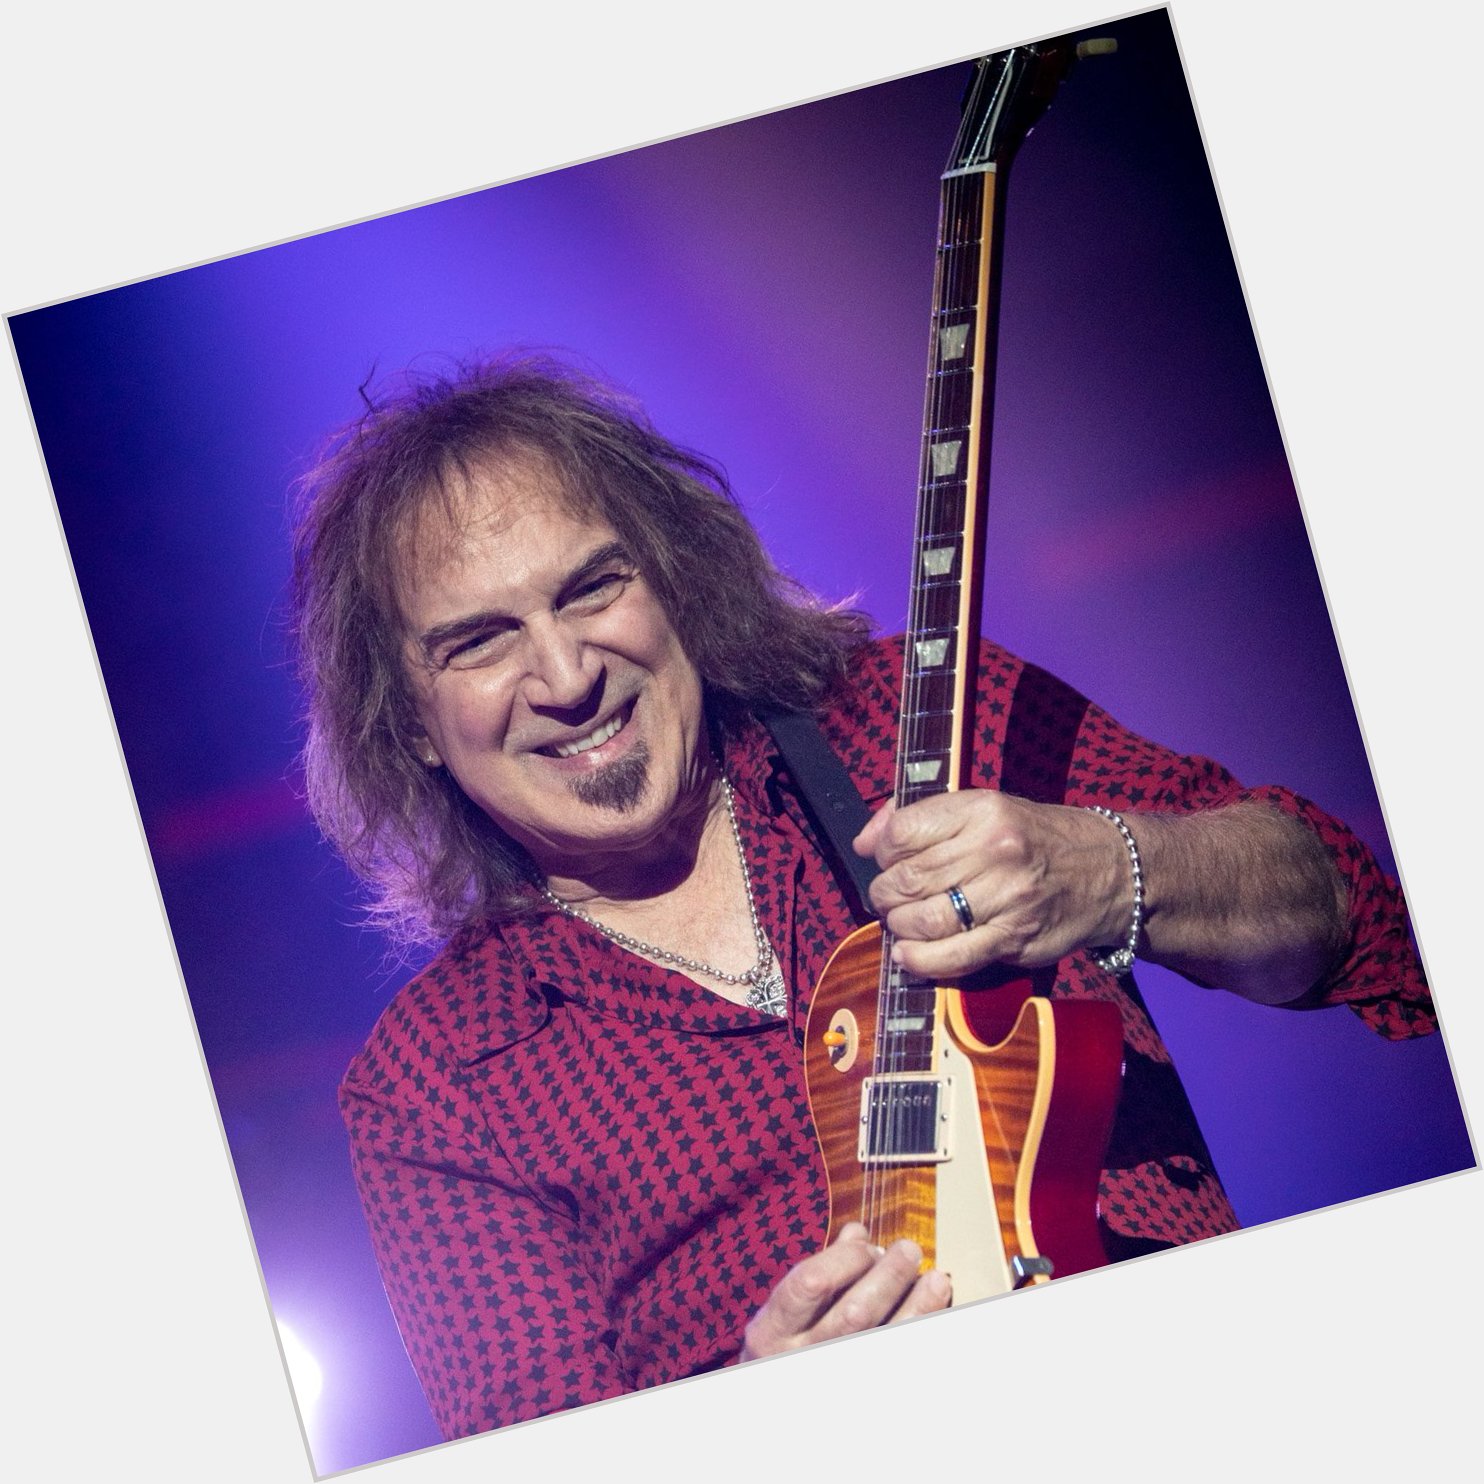 Happy birthday to the great Dave Amato! No one rocks like you do.

Send him a birthday greeting in the comments. 